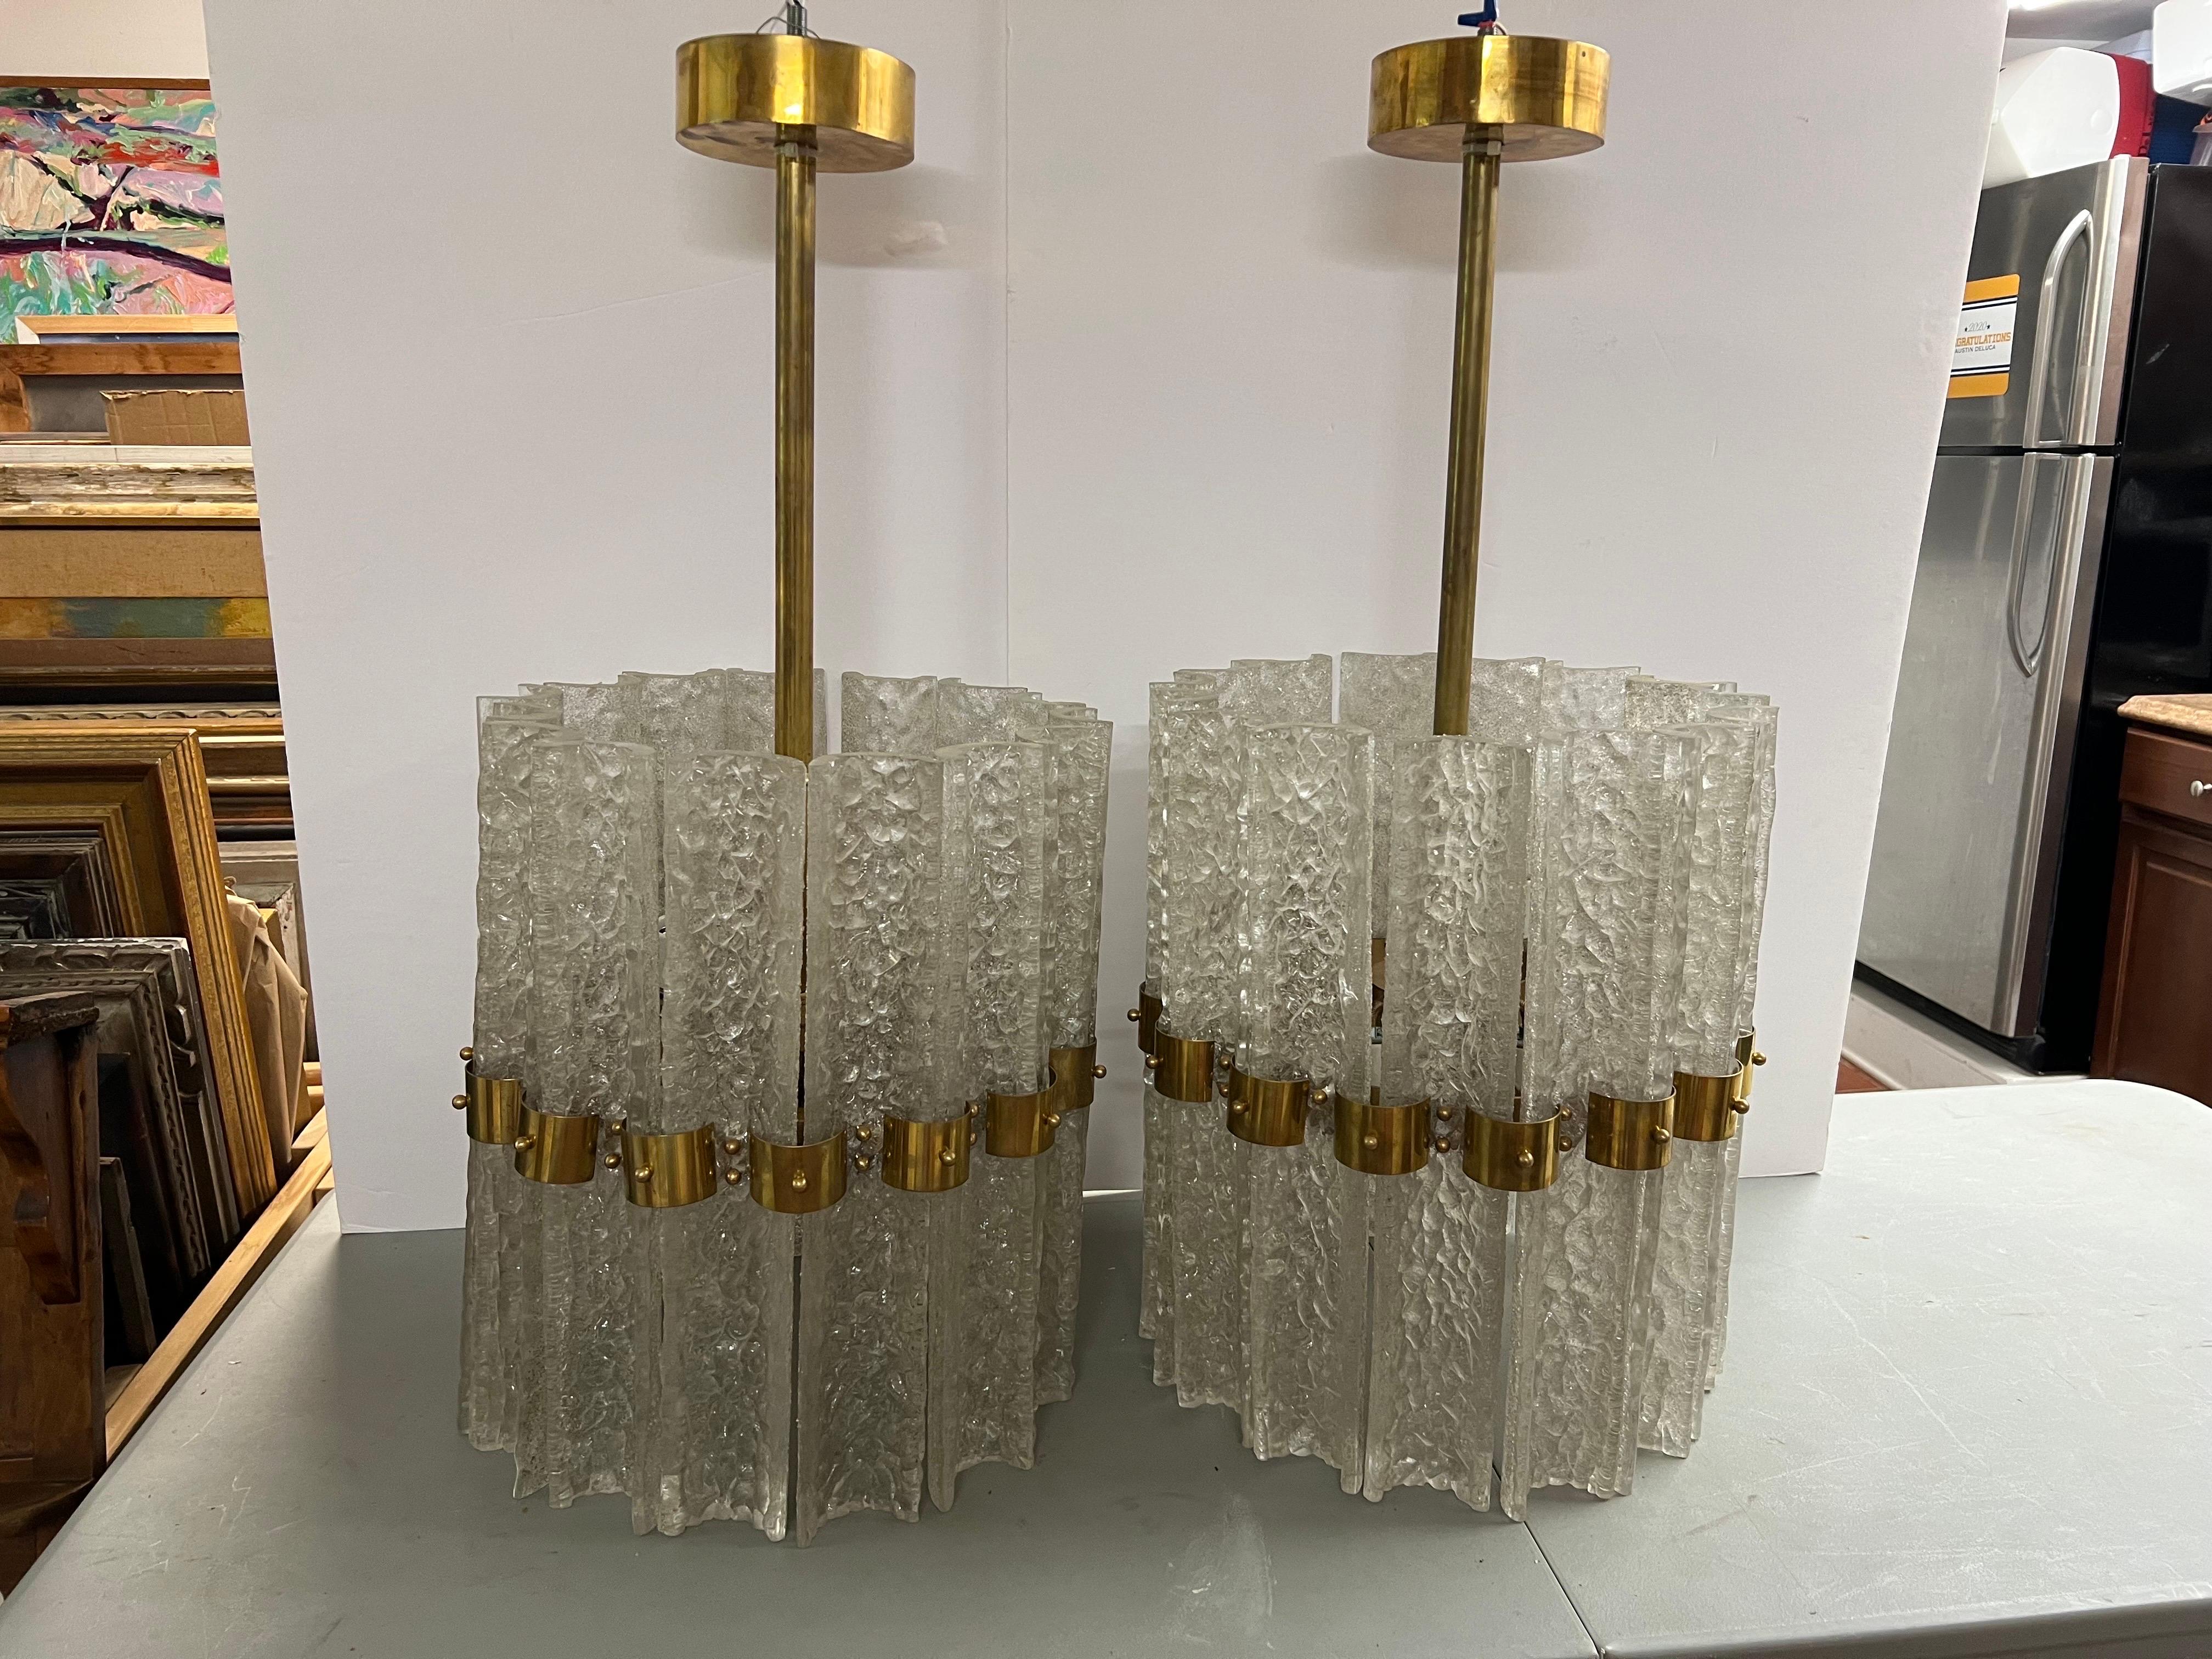 Pair of Large Crystal Orrefors Chandeliers by Carl Fagerlund. Perfect for above a dining table. They would be a dramatic statement in any home. We love the brass accents. They are mid century modern but clean in an minimalist way.
These pair are